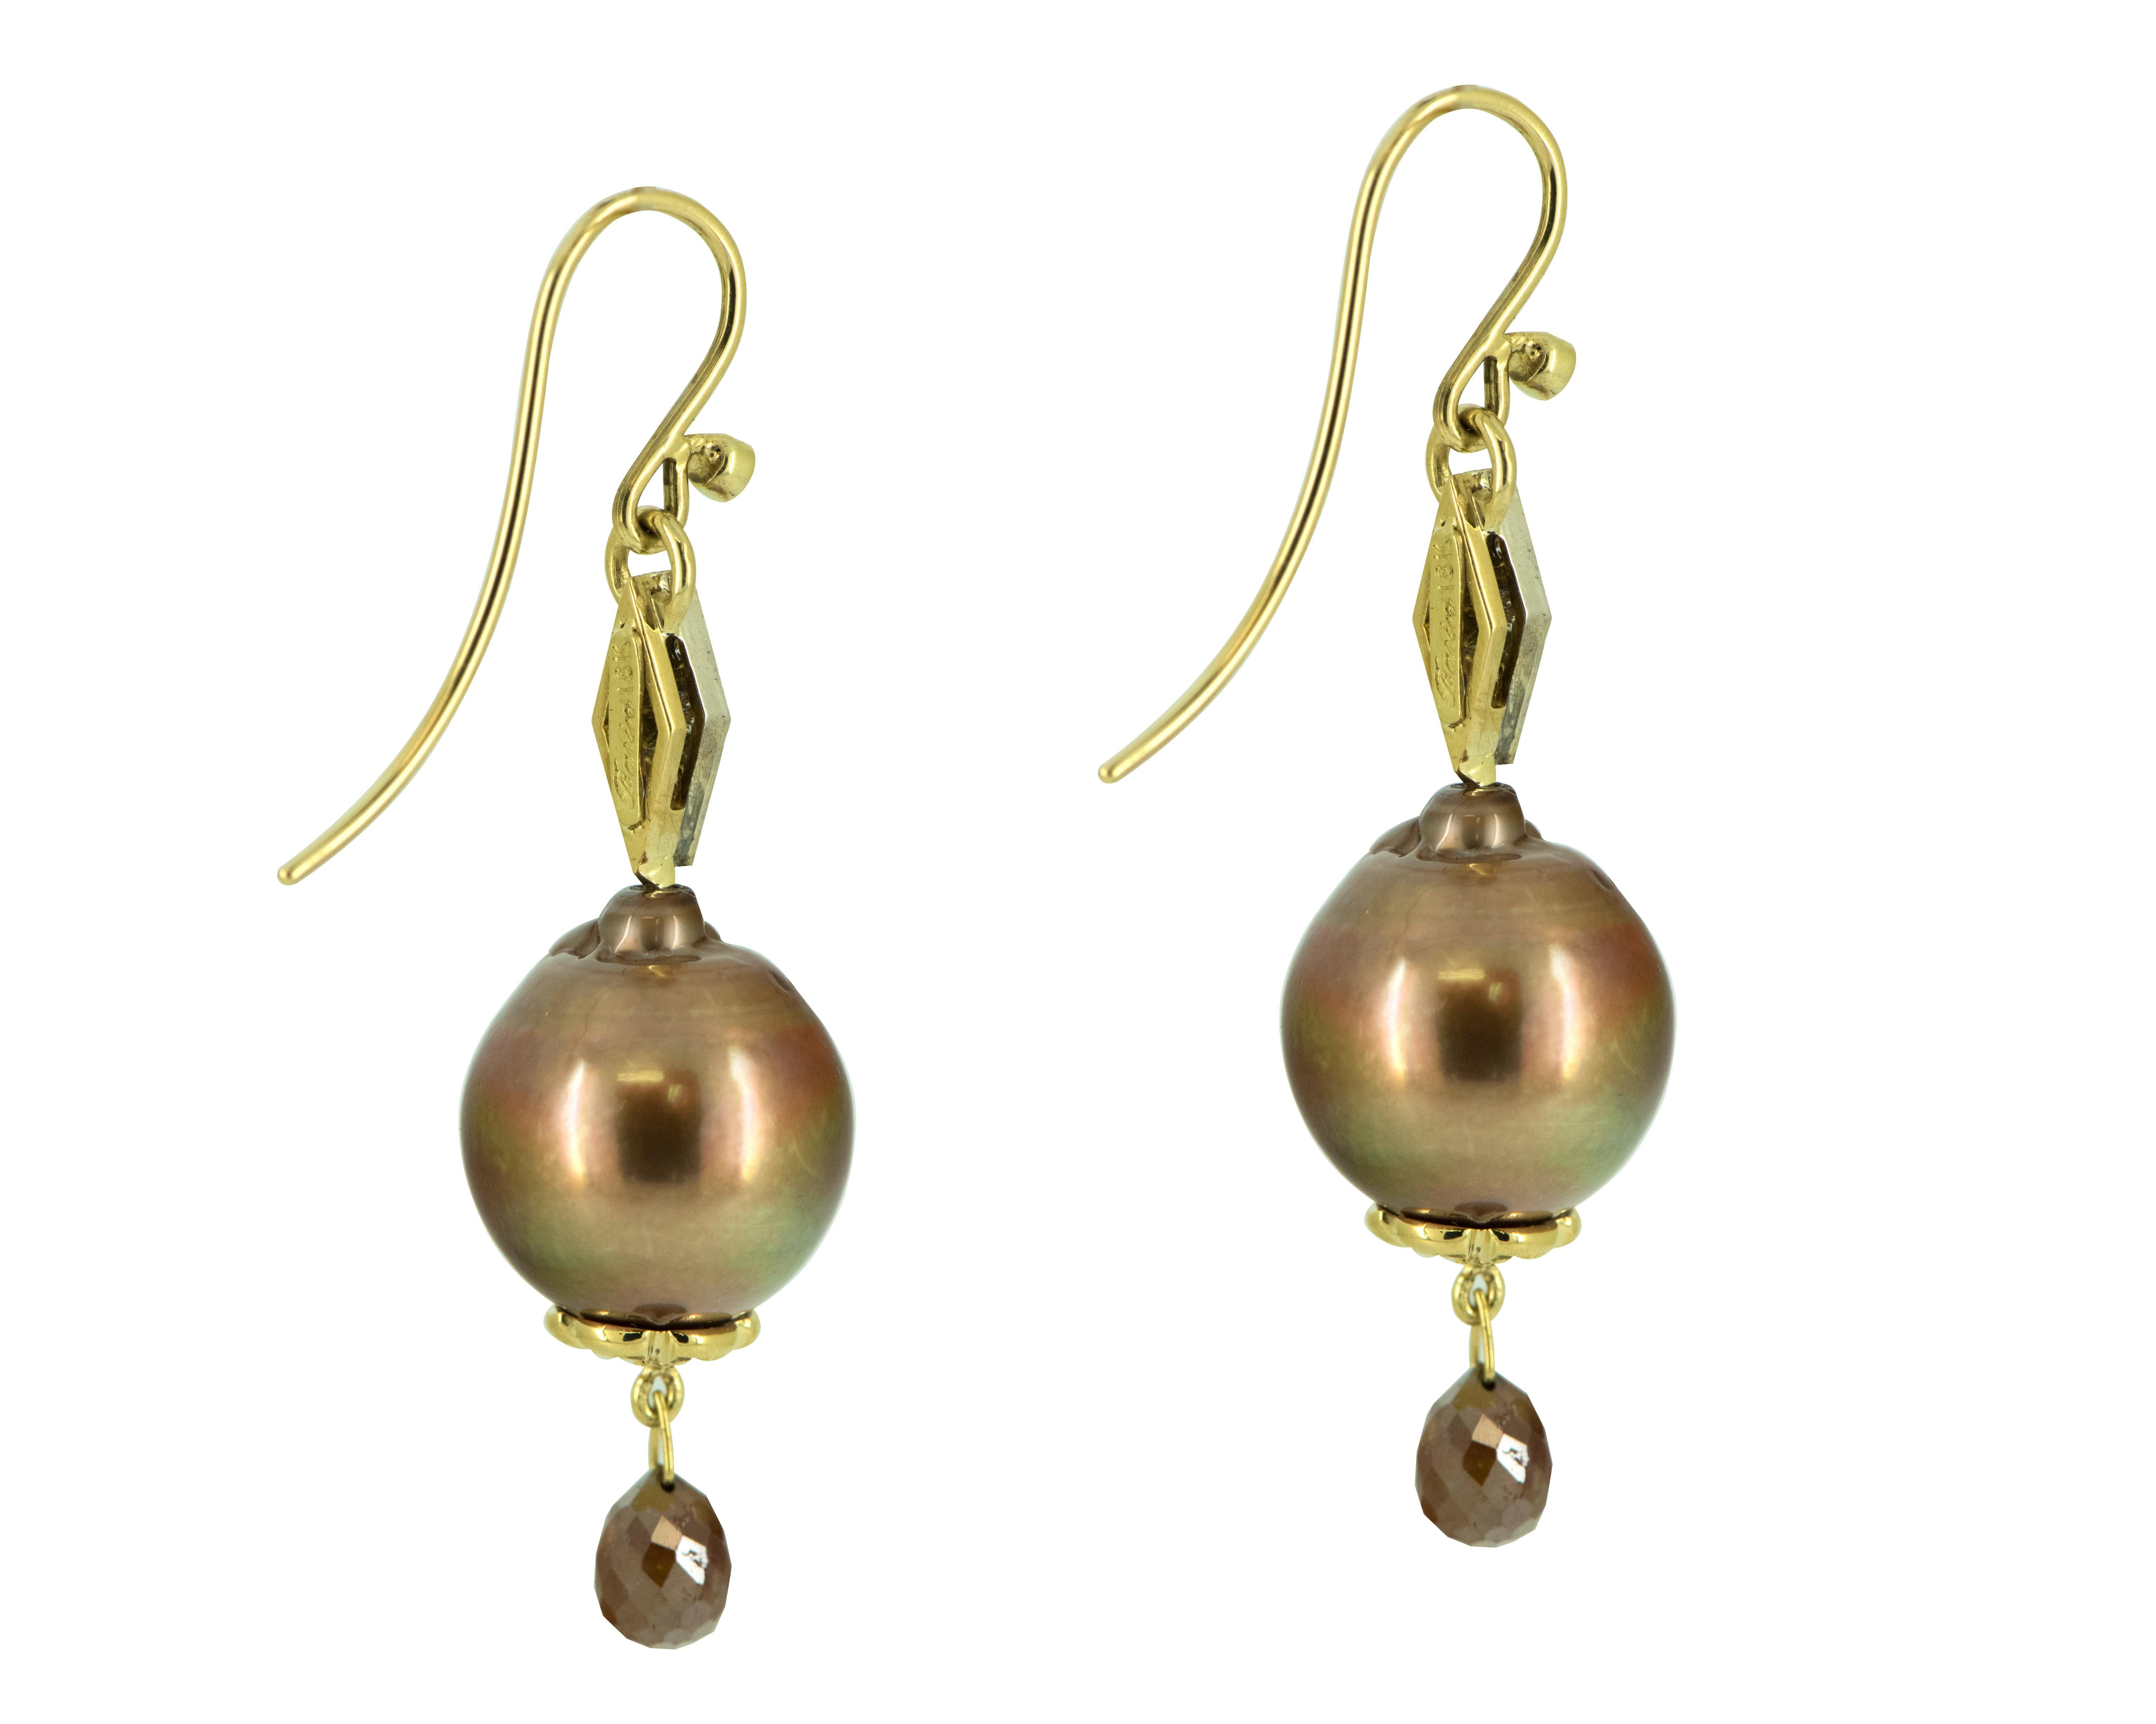 These Truffle Chocolate Cultured Pearl and Diamond Earrings are a timeless piece that is perfect for the modern woman looking to add a touch of elegance to her jewelry collection. The combination of pearls, diamonds, and 18 Karat Yellow Gold creates